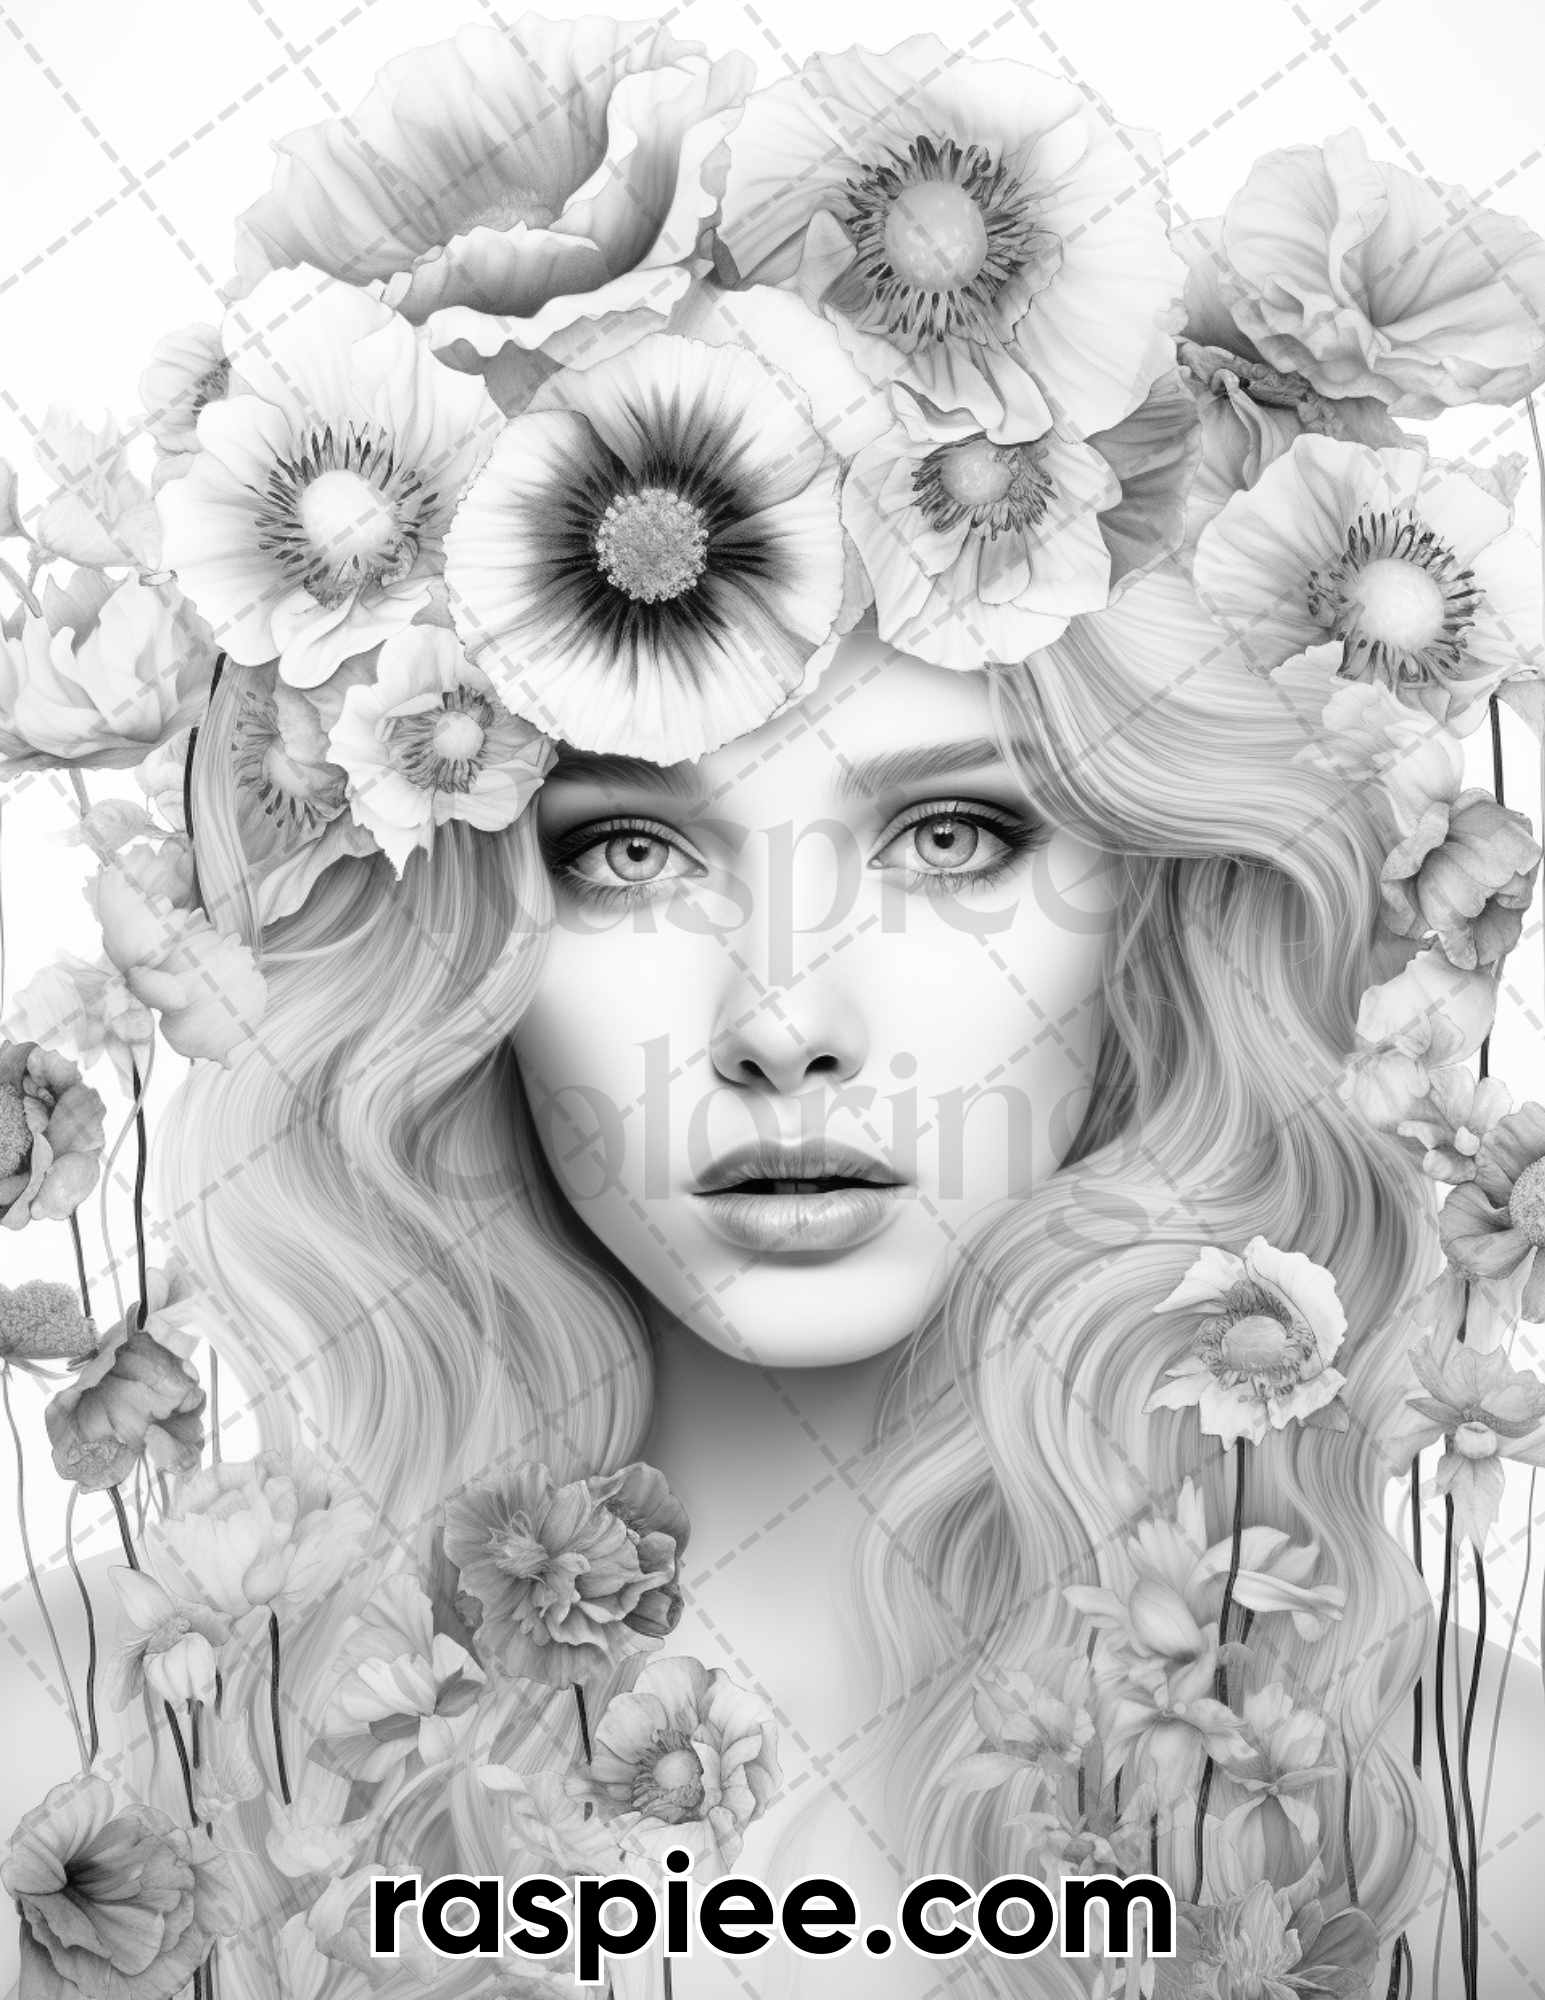 Coloring Page Floral Girl Printable Coloring Pages Adult Grayscale Coloring  Page Original Line Art Illustrations Gift for Her PDF Poster 